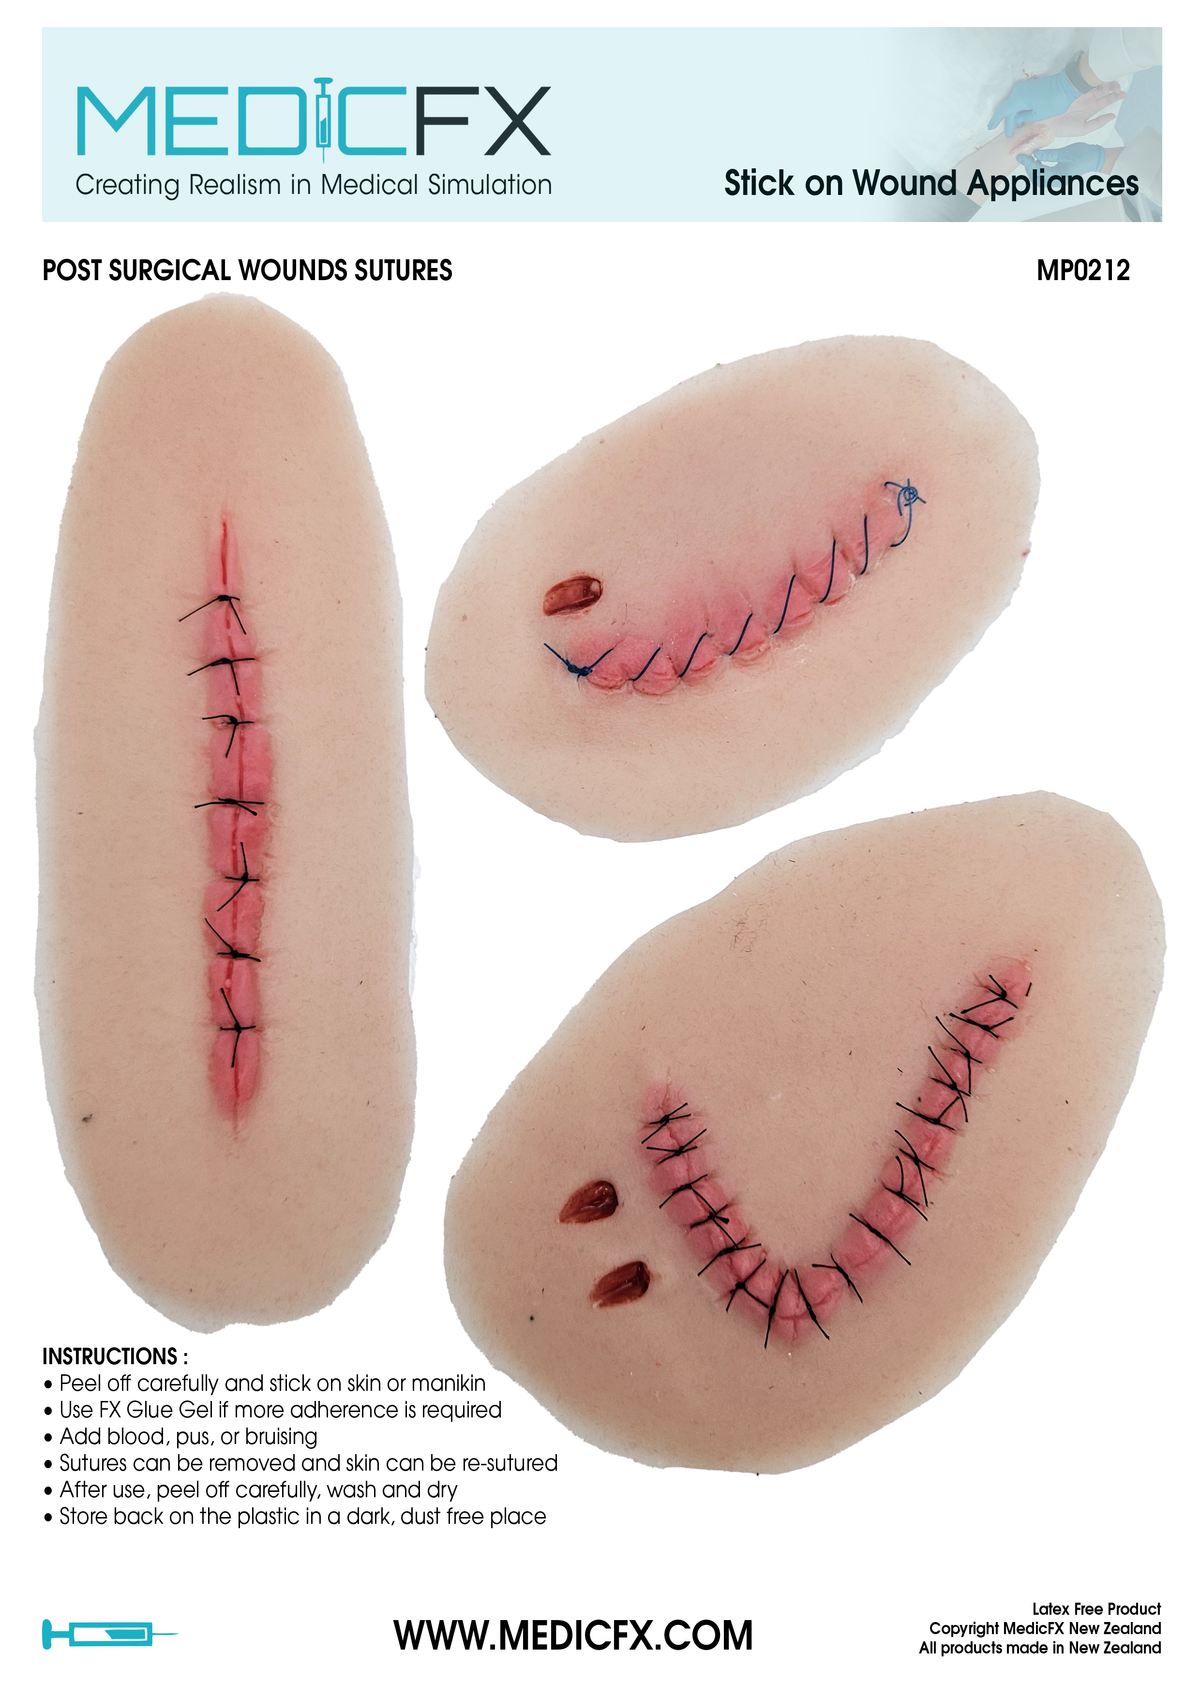 MP0212 Sheet Post Surgical Wounds Sutures